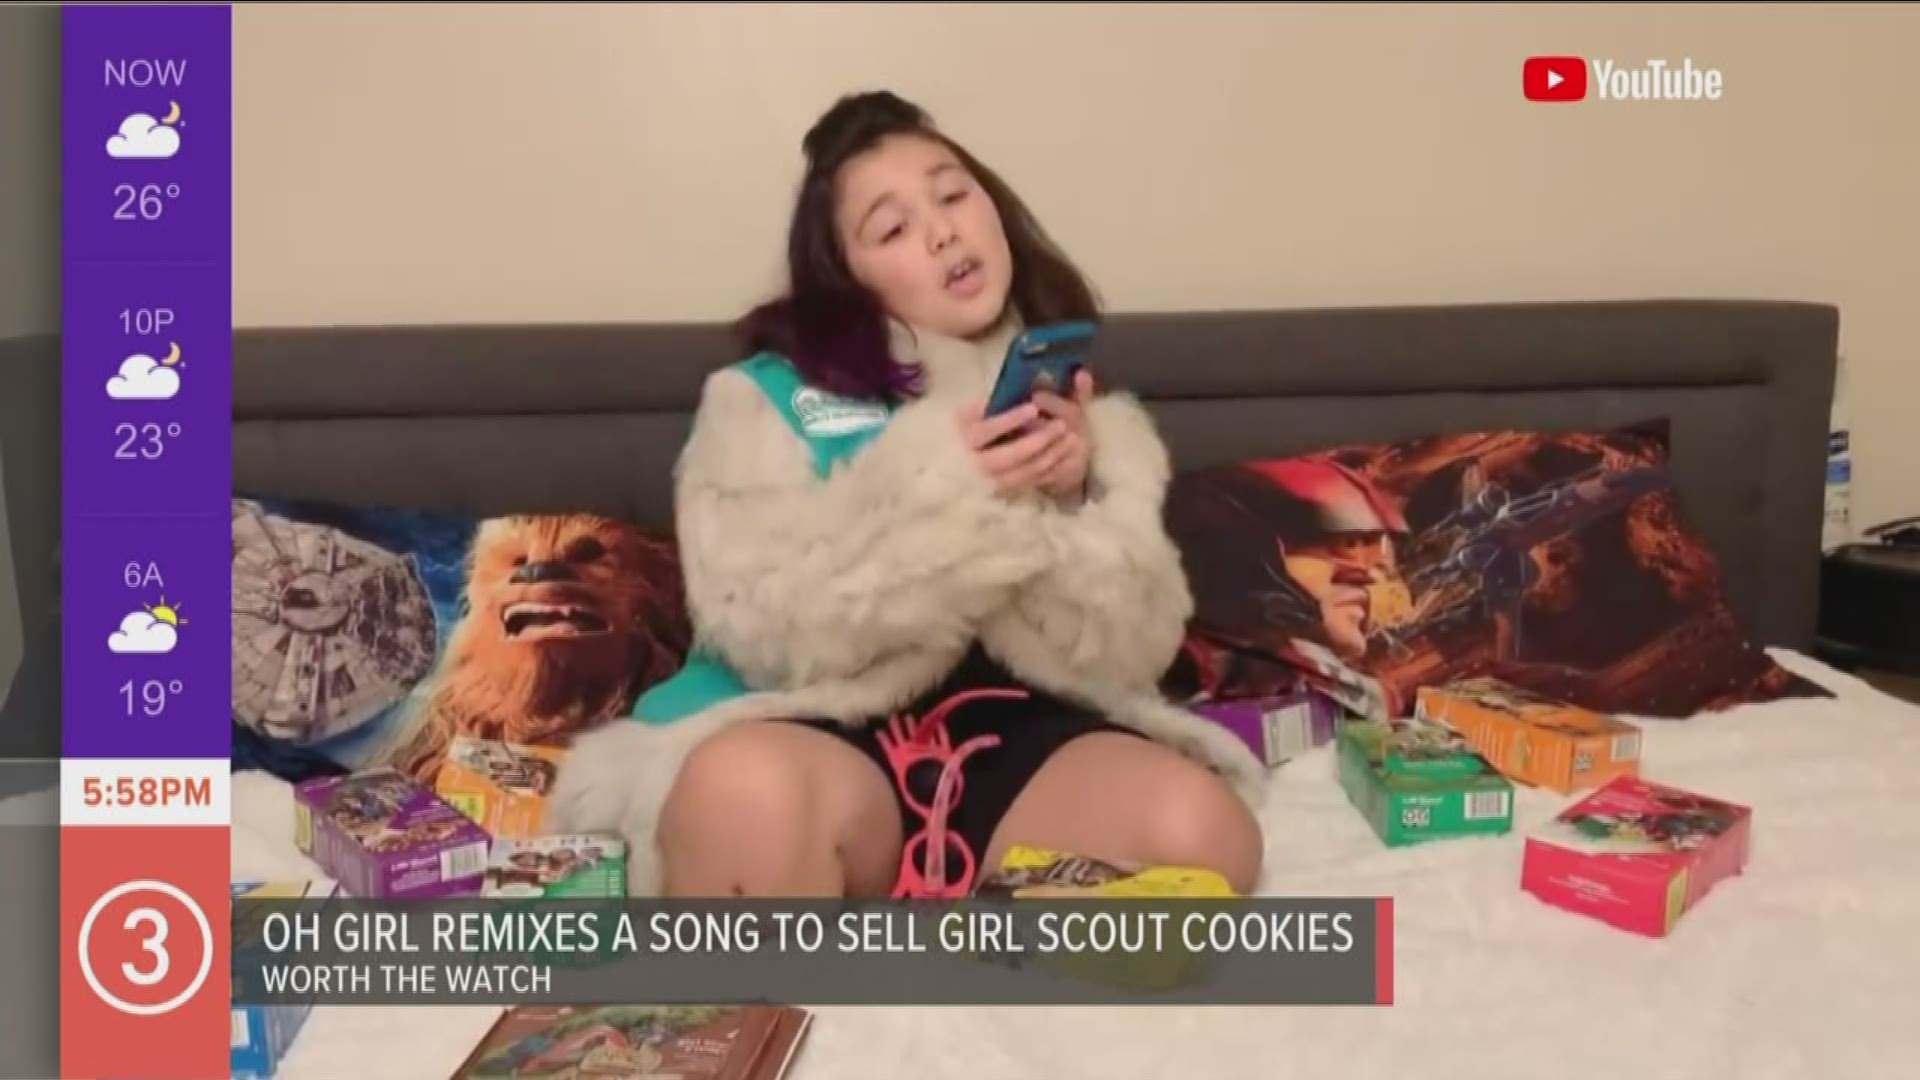 Ohio Girl Scout remixes Lizzo song as marketing tool